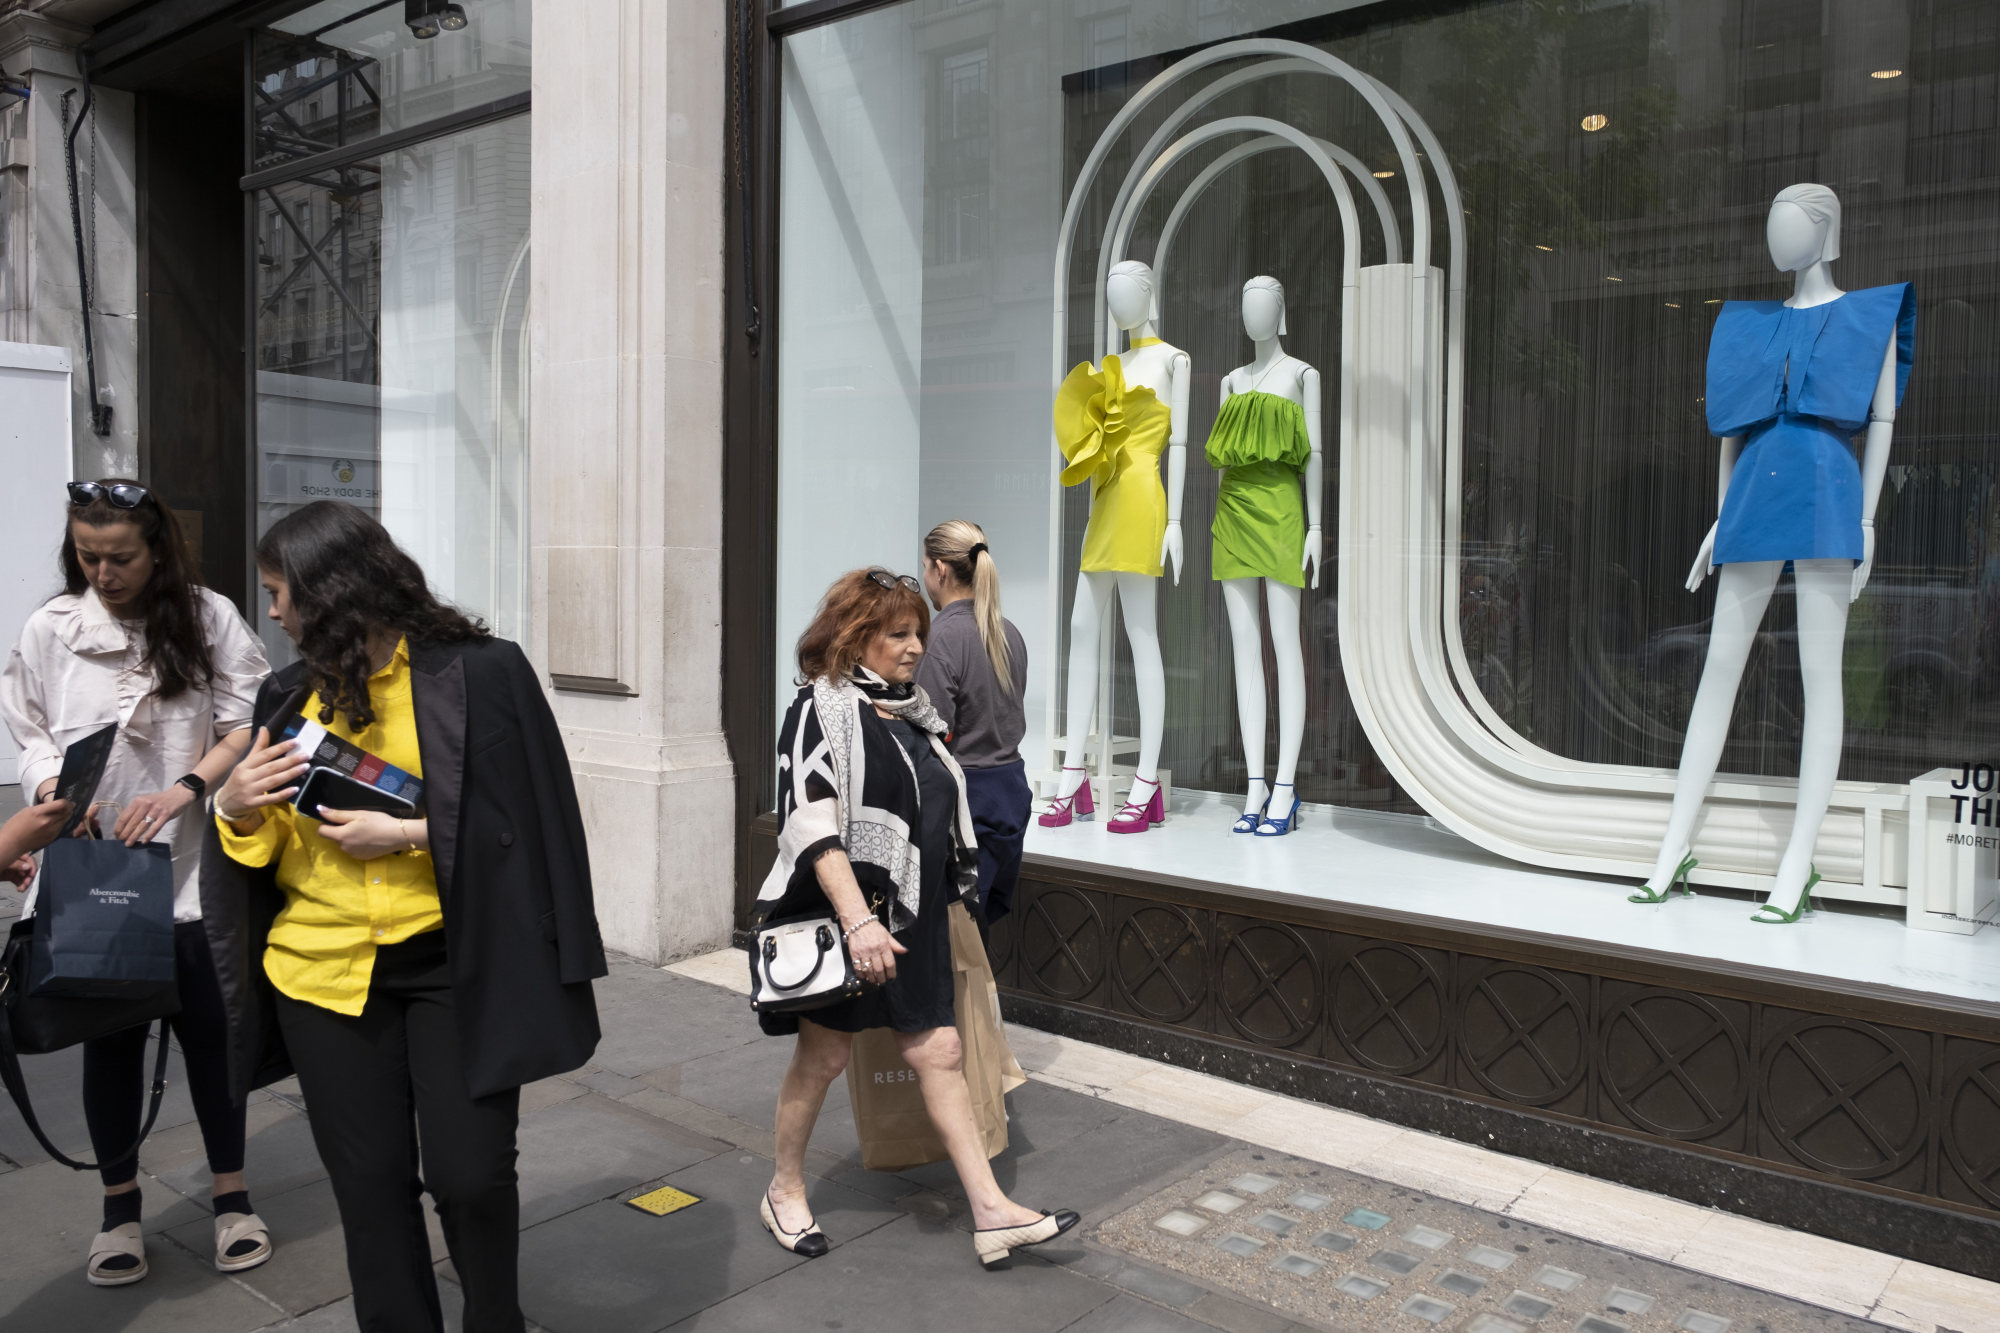 London’s Regent Street struggles to draw shoppers back after pandemic ...